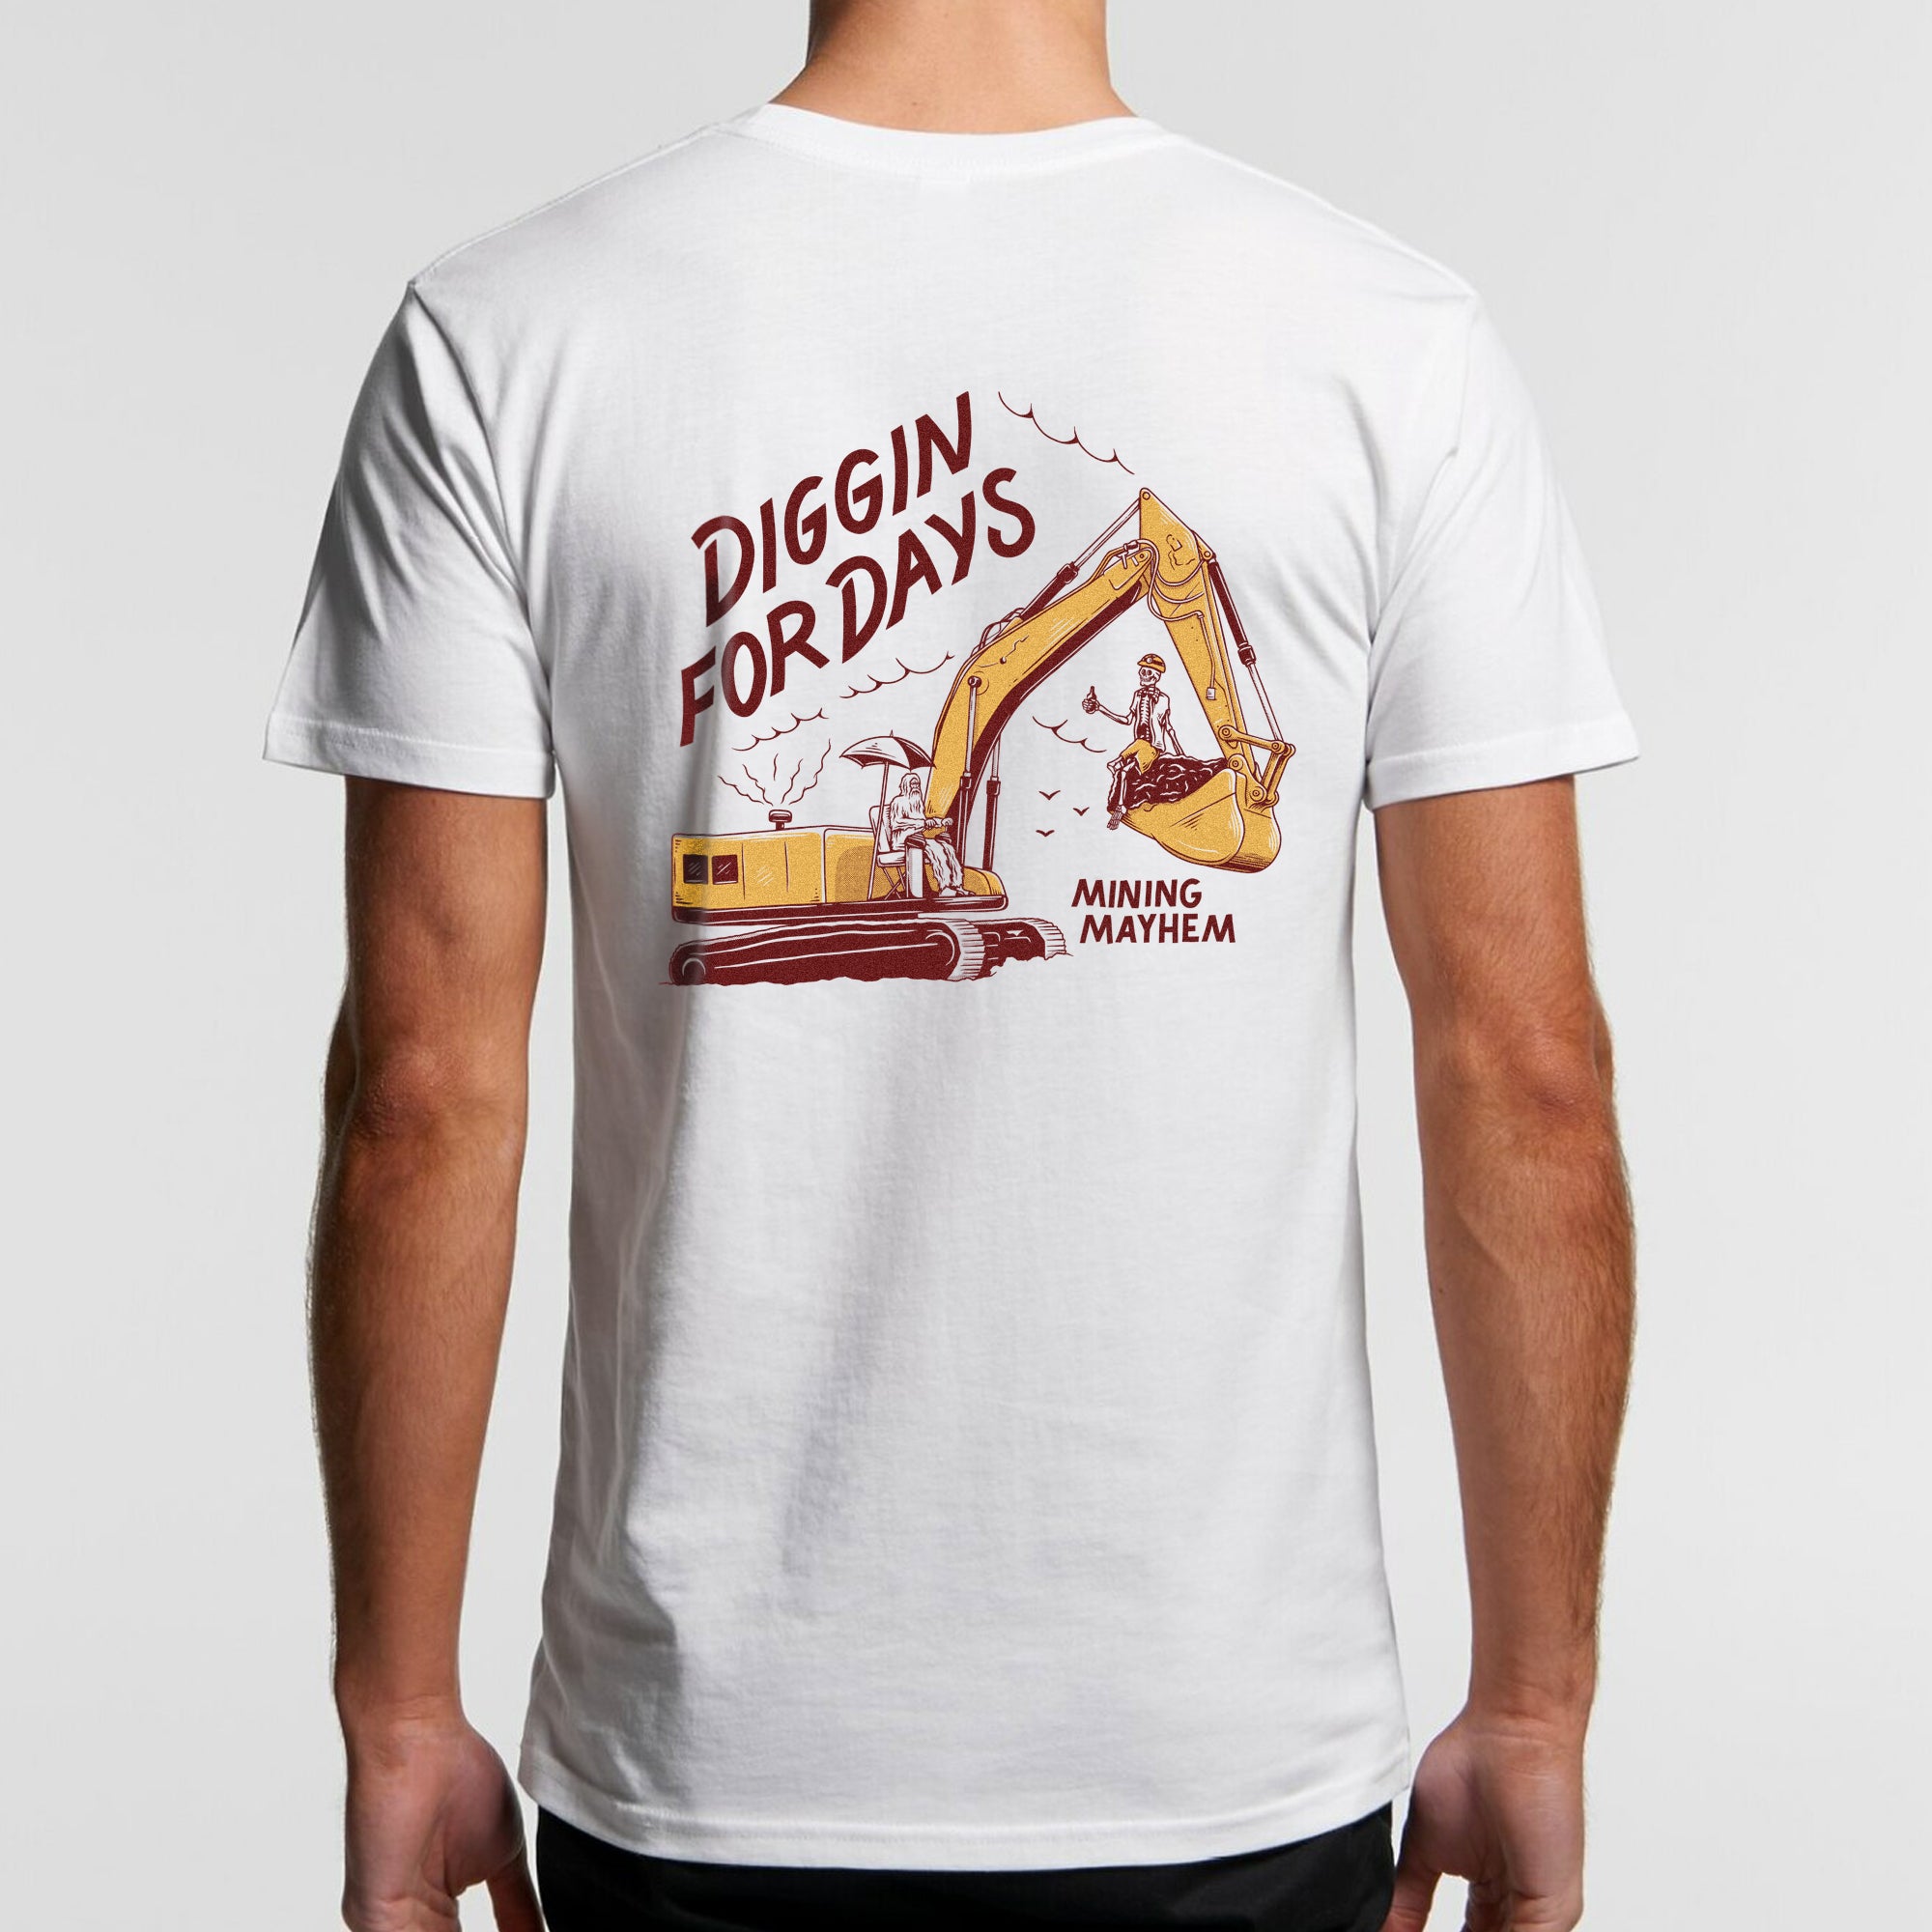 DIGGIN FOR DAYS - T-Shirt (White)